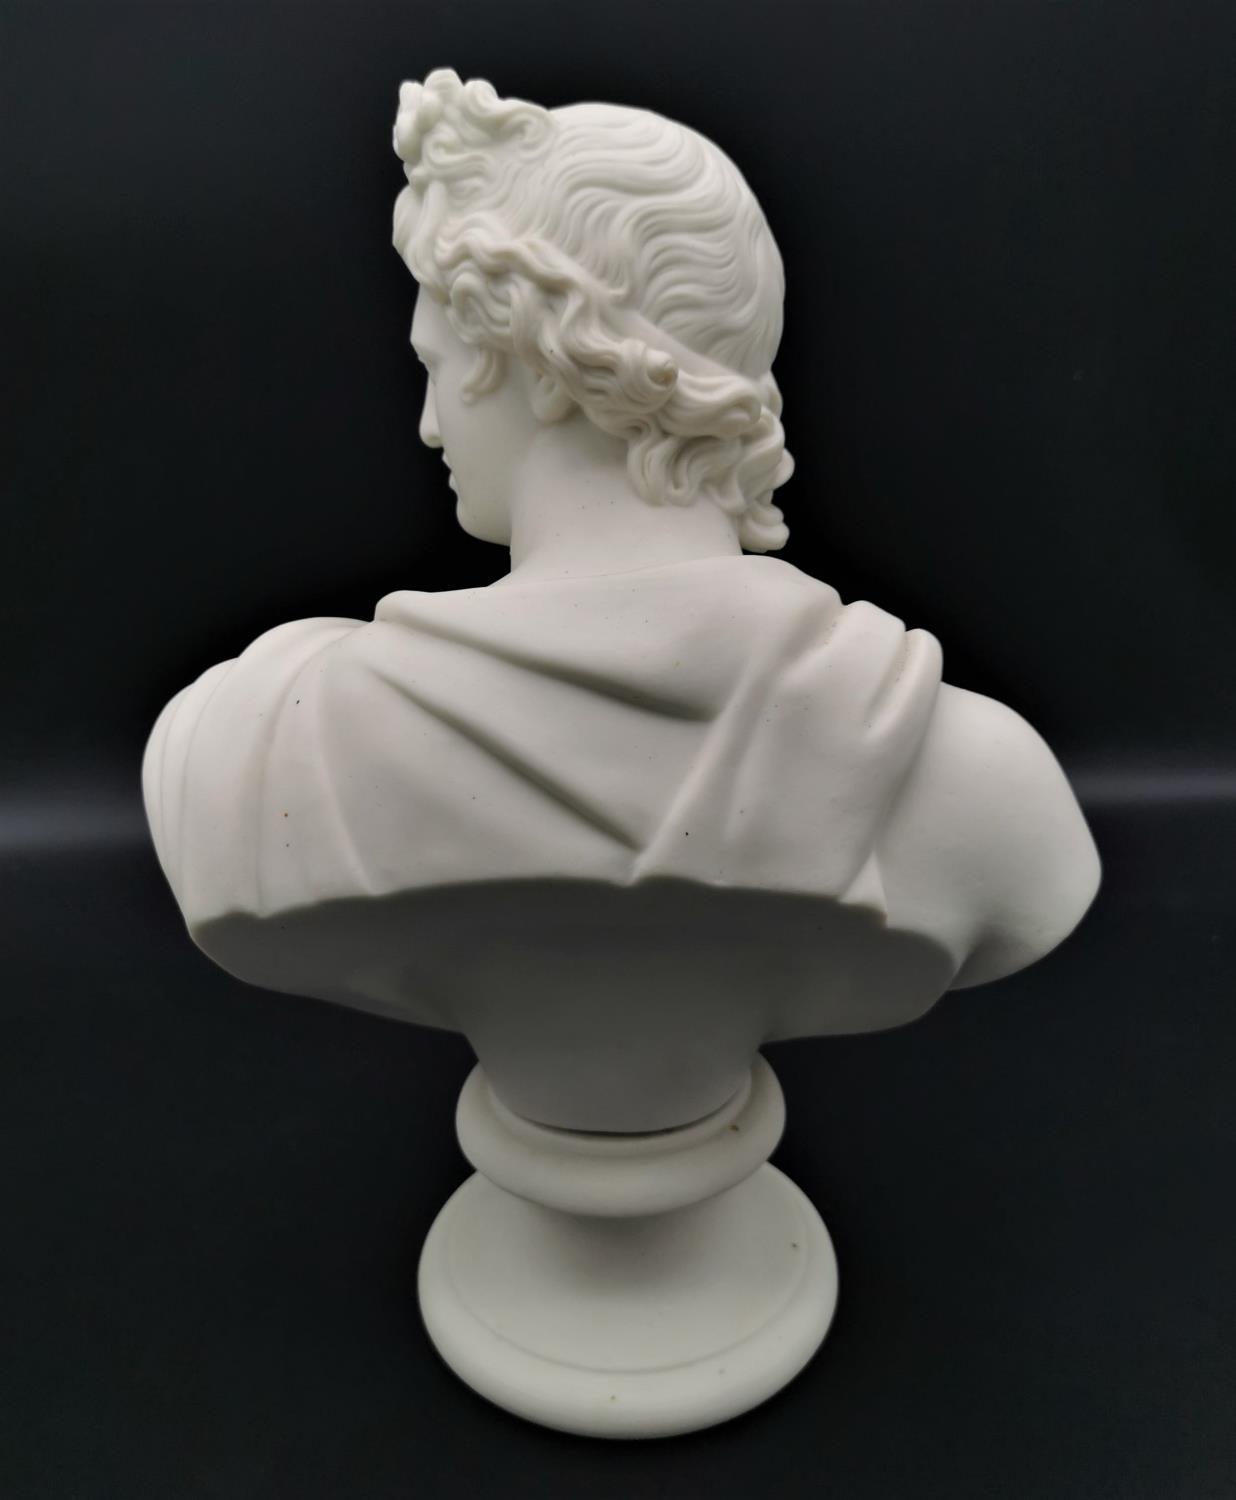 A turn of the century parian ware bust of Apollo after C. Delpech, possibly by Copeland, on a - Image 3 of 4